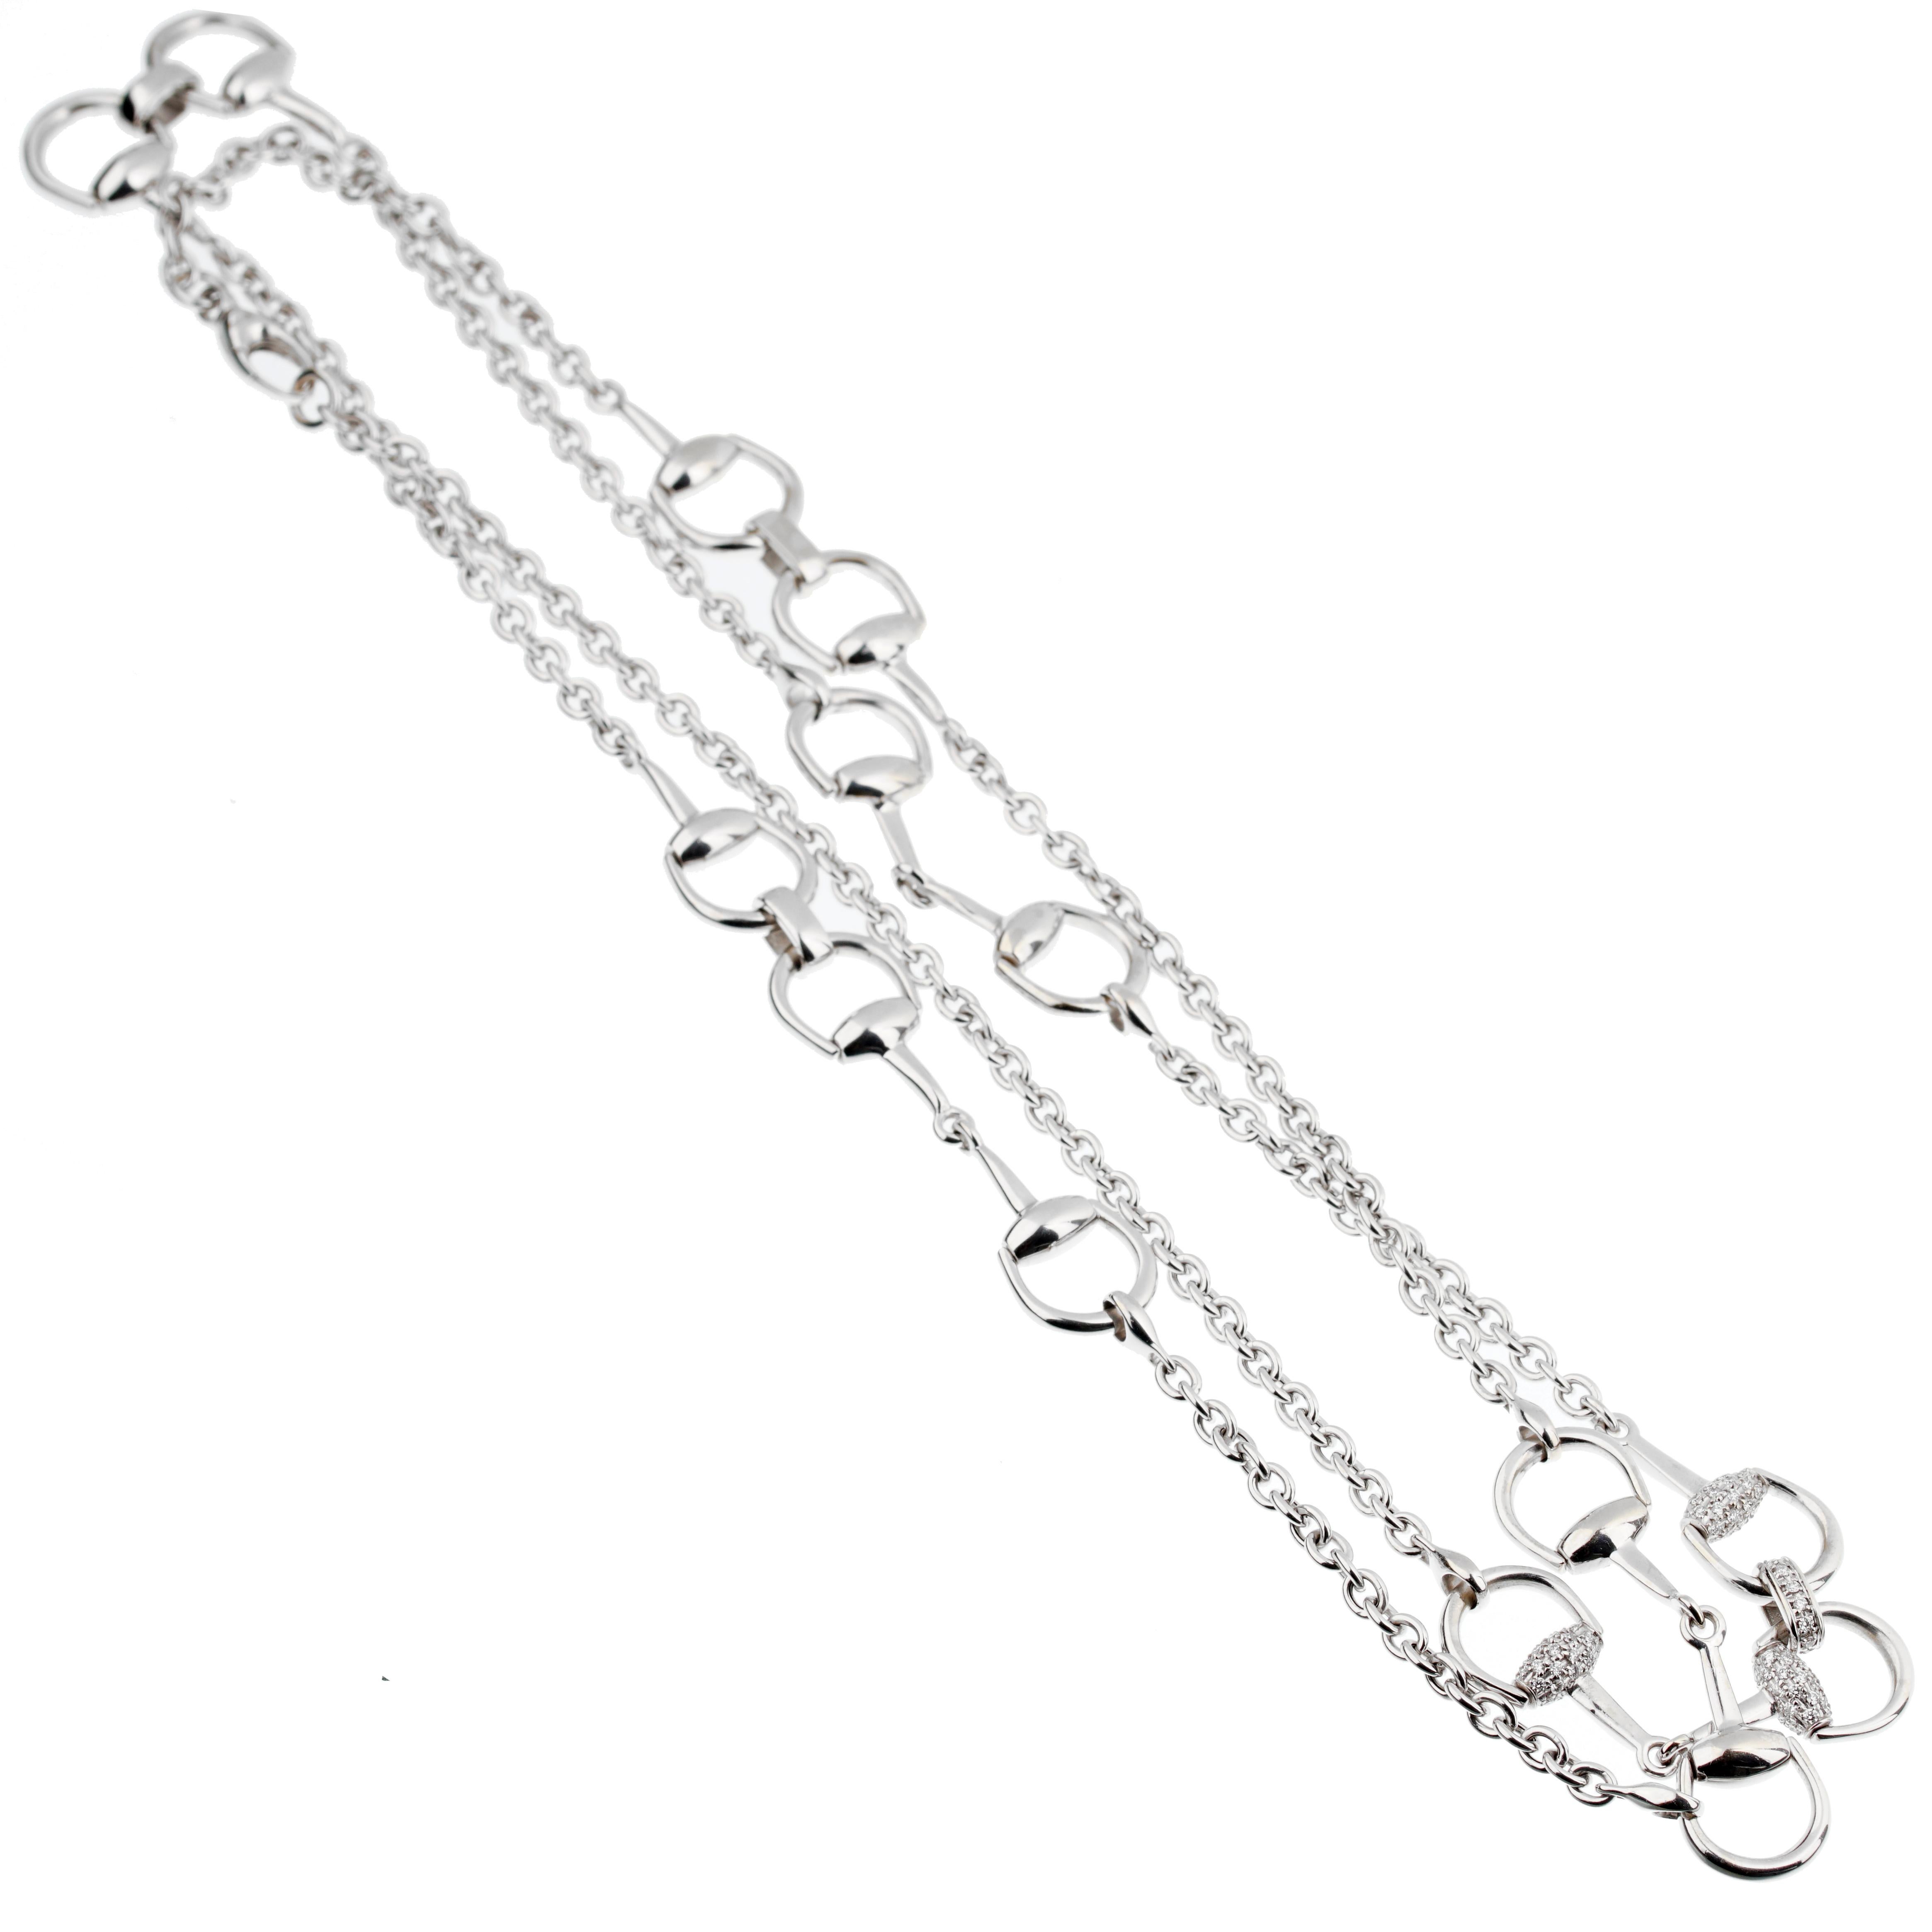 A magnificent Gucci necklace featuring the iconic Horsebit motif in 18k white gold, this fabulous necklace measures 36